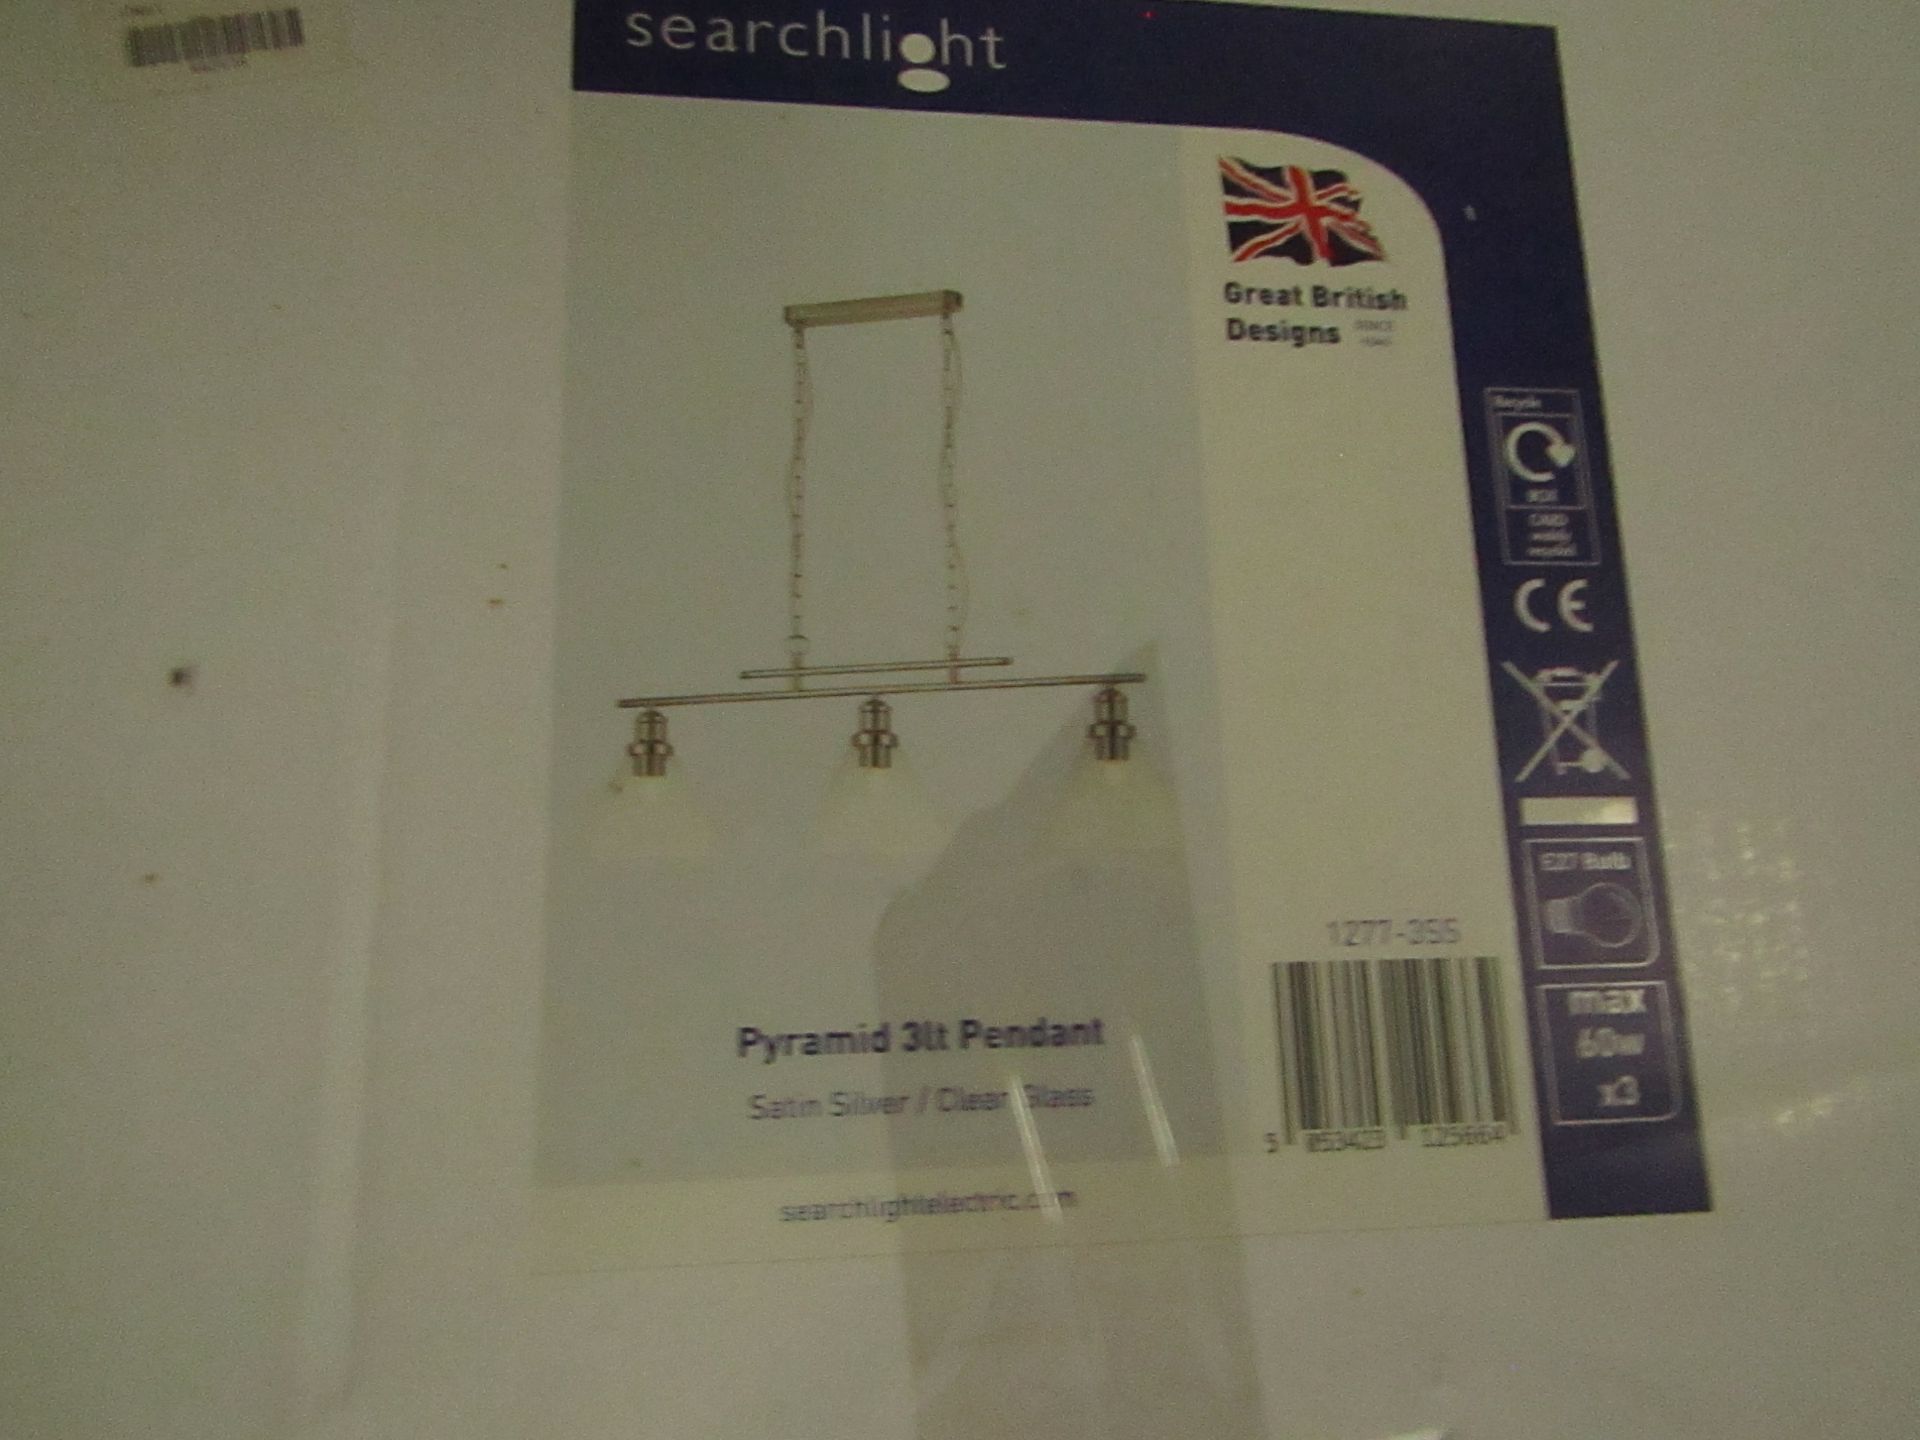 Searchlight Pyramid 3lt Pendant Ss Clear Glass Shade RRP ô?198.00 - This lot contains unsorted raw - Image 2 of 2